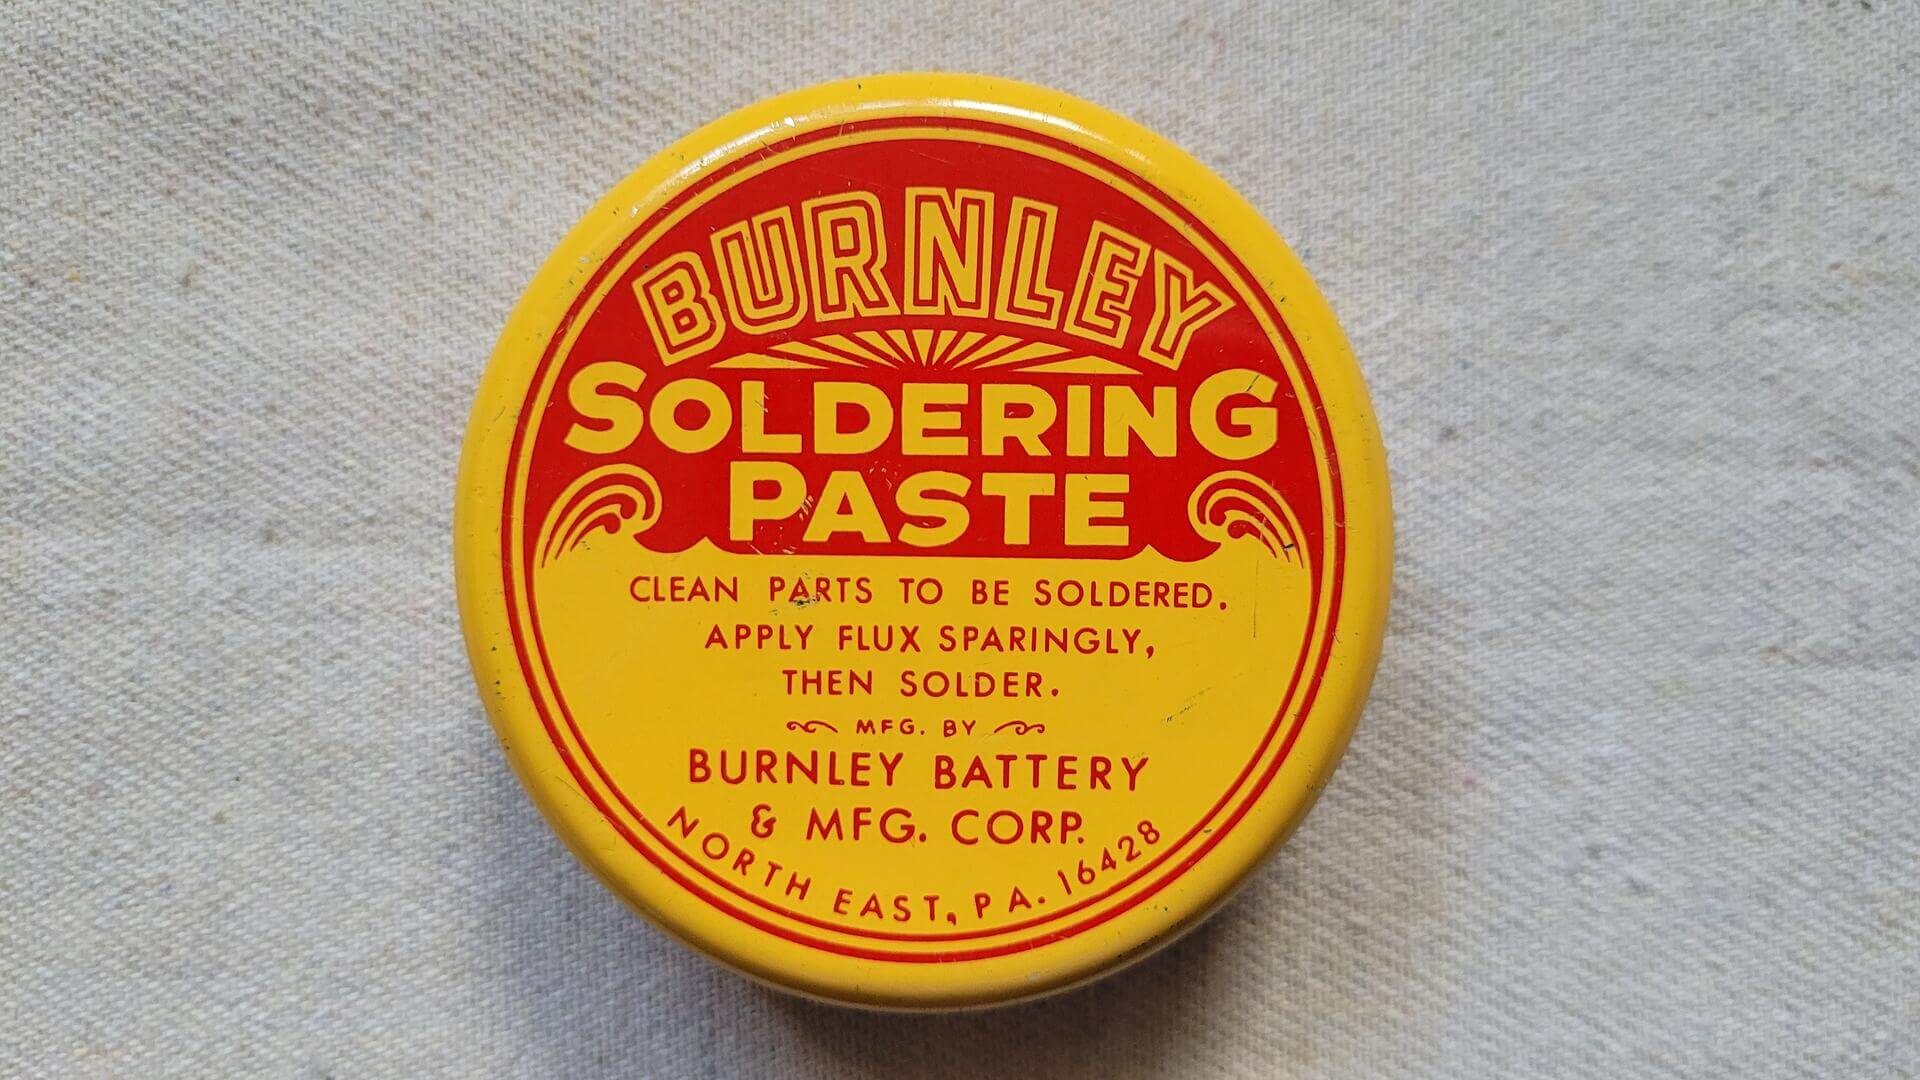 Brunley Battery & Mfg Co, North East Pennsylvania antique soldering paste 2 ounce yellow tin can with bold red lettering. Nice made in USA vintage collectible advertising container and beautiful early 20th century product and marketing design piece